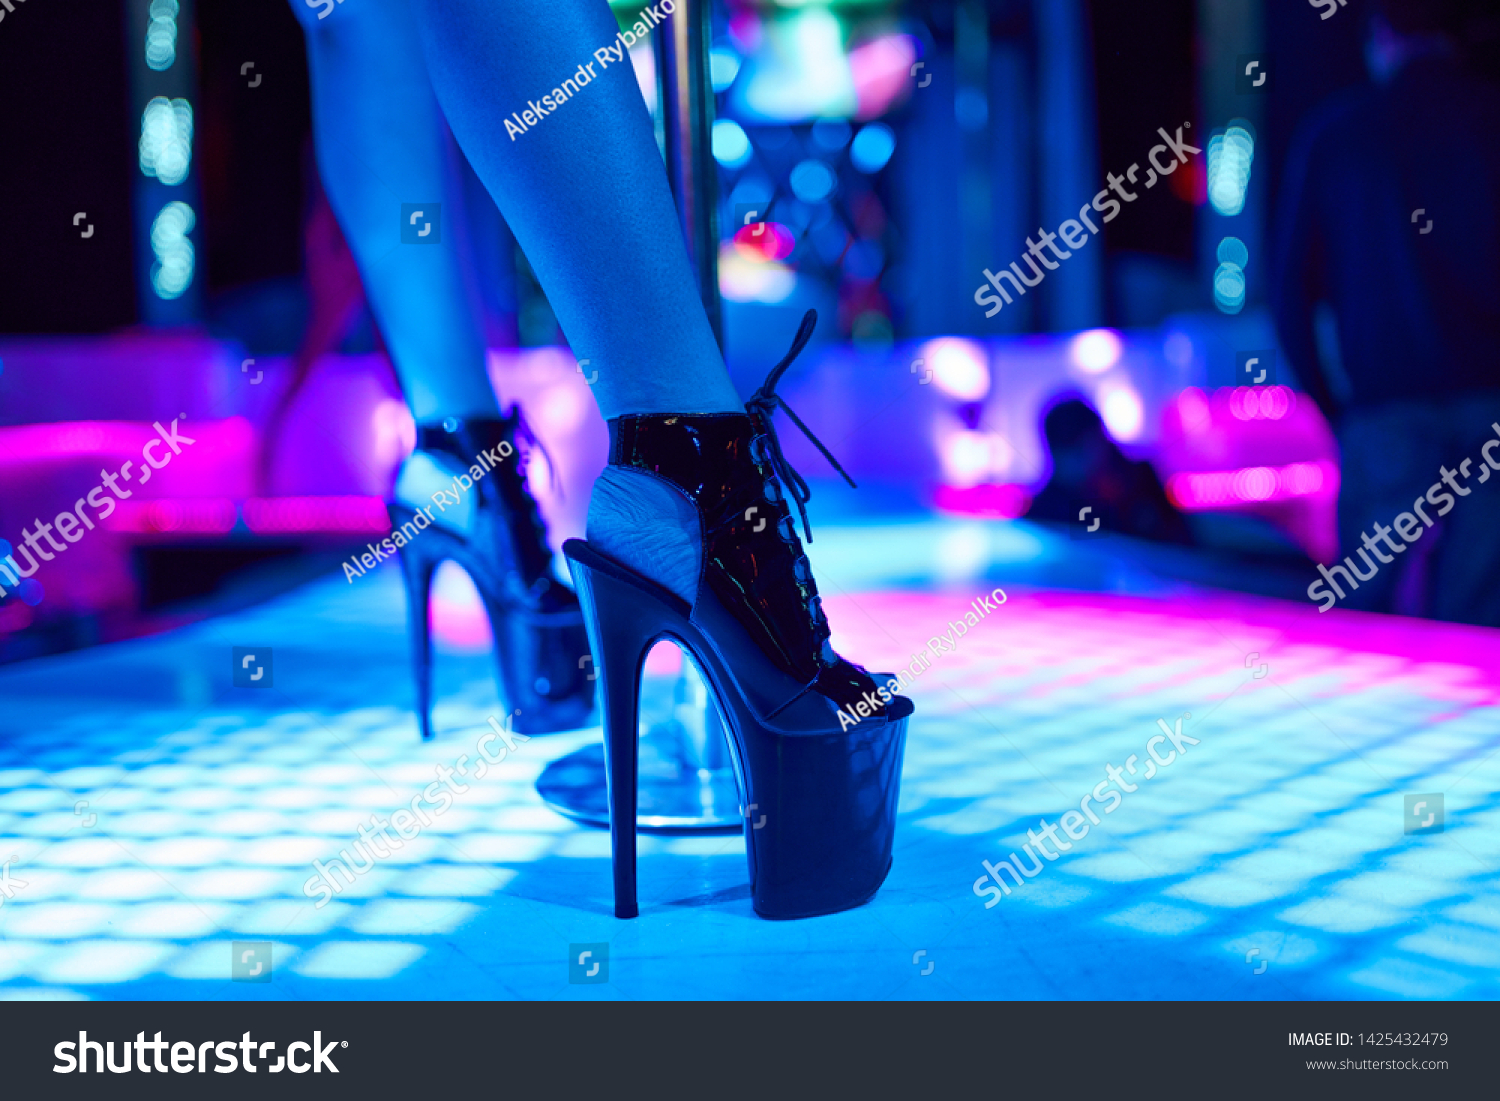 Young Sexy Girl Strip Club Luring写真素材1425432479 Shutterstock 6281